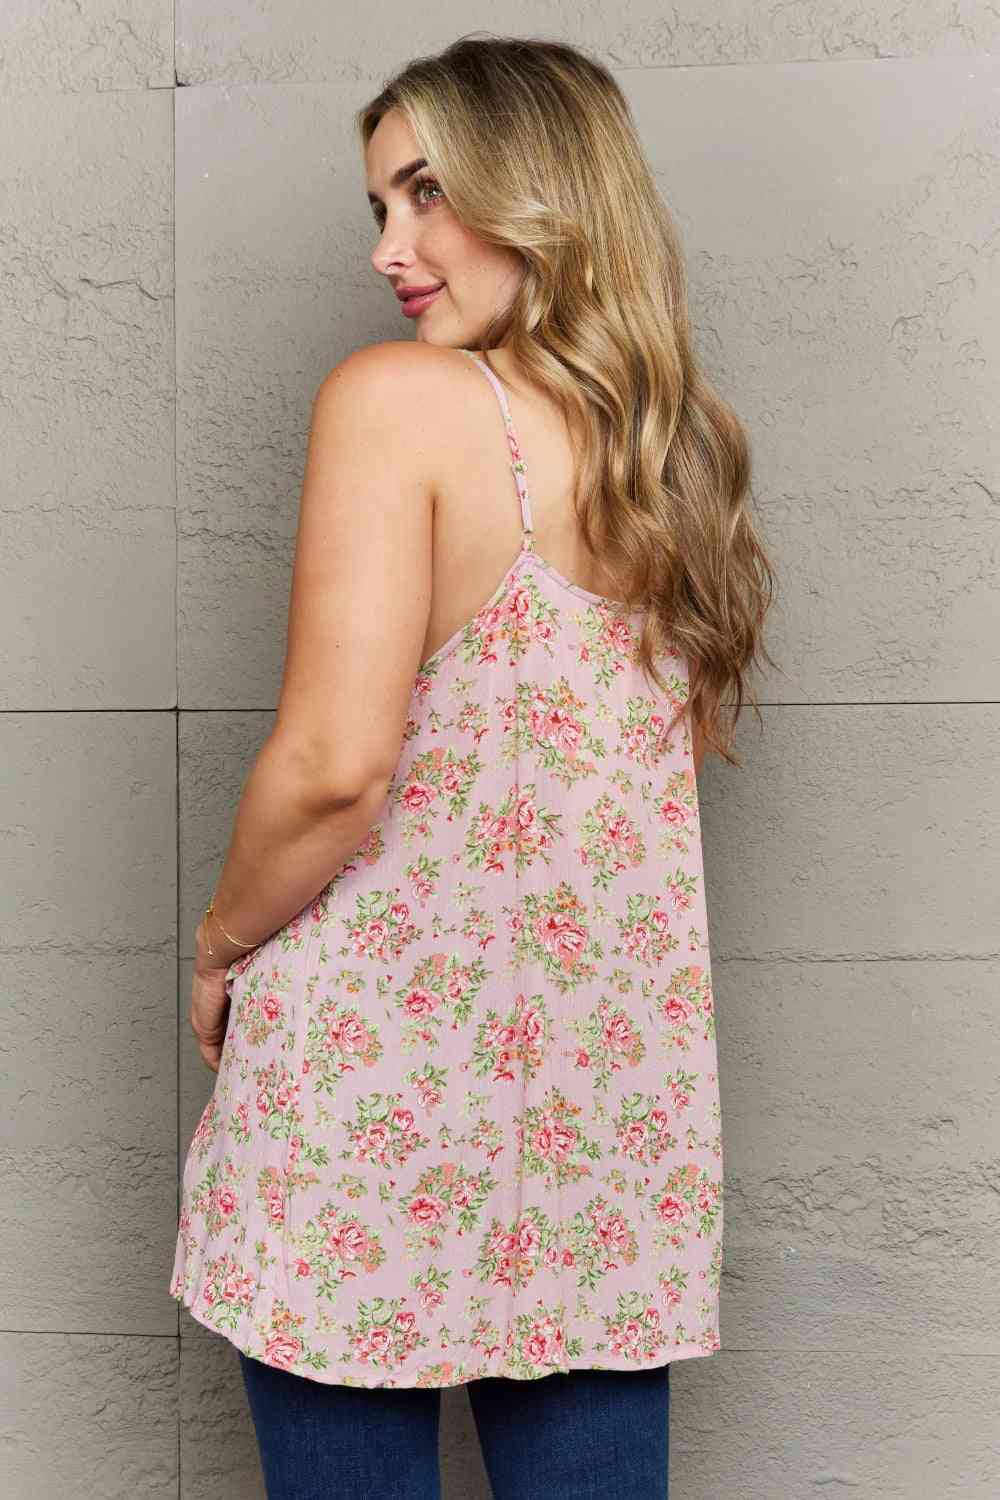 Ninexis Hang Loose Tulip Hem Cami Top in Mauve Floral - Dixie Hike & Style